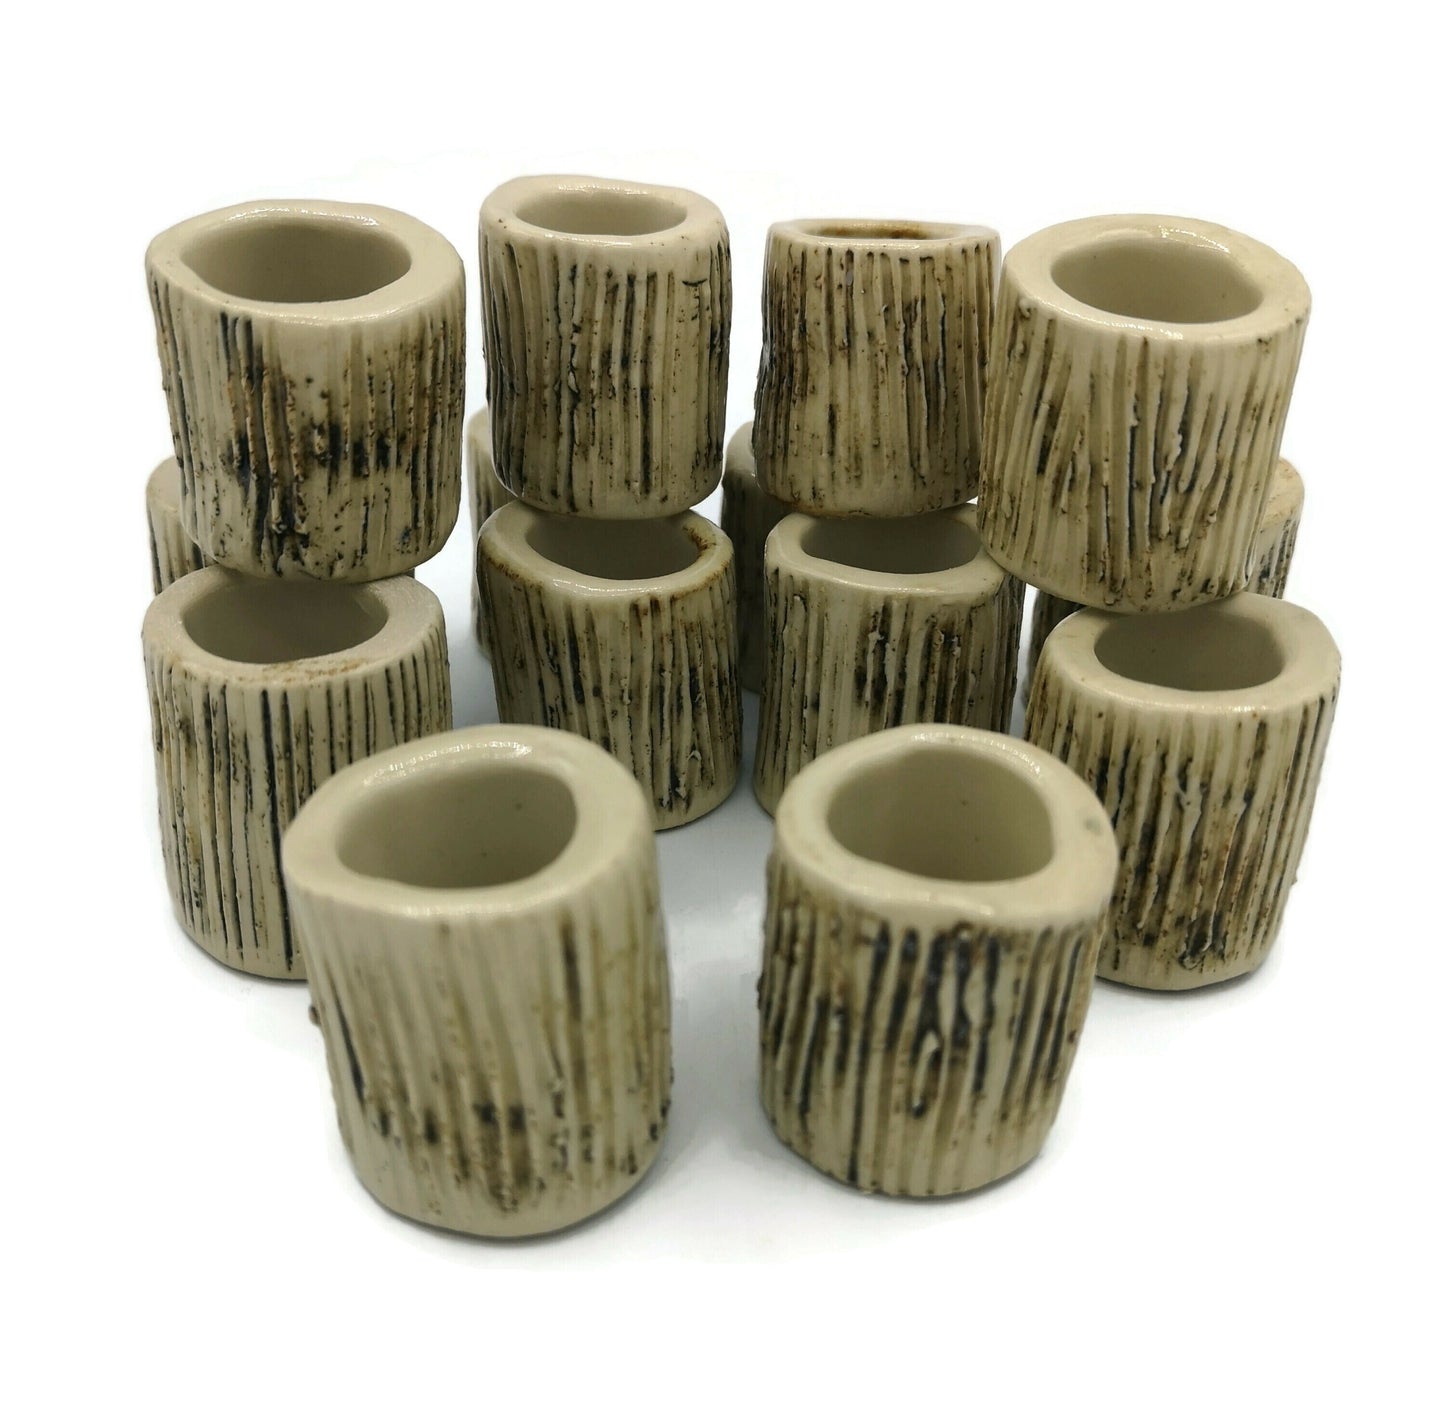 LARGE TUBE BEADS, 35mm Handmade Ceramic Macrame Beads For Crafts, Best Gifts For Him, Clay Bead, Large Hole Beads For Dreadlock - Ceramica Ana Rafael